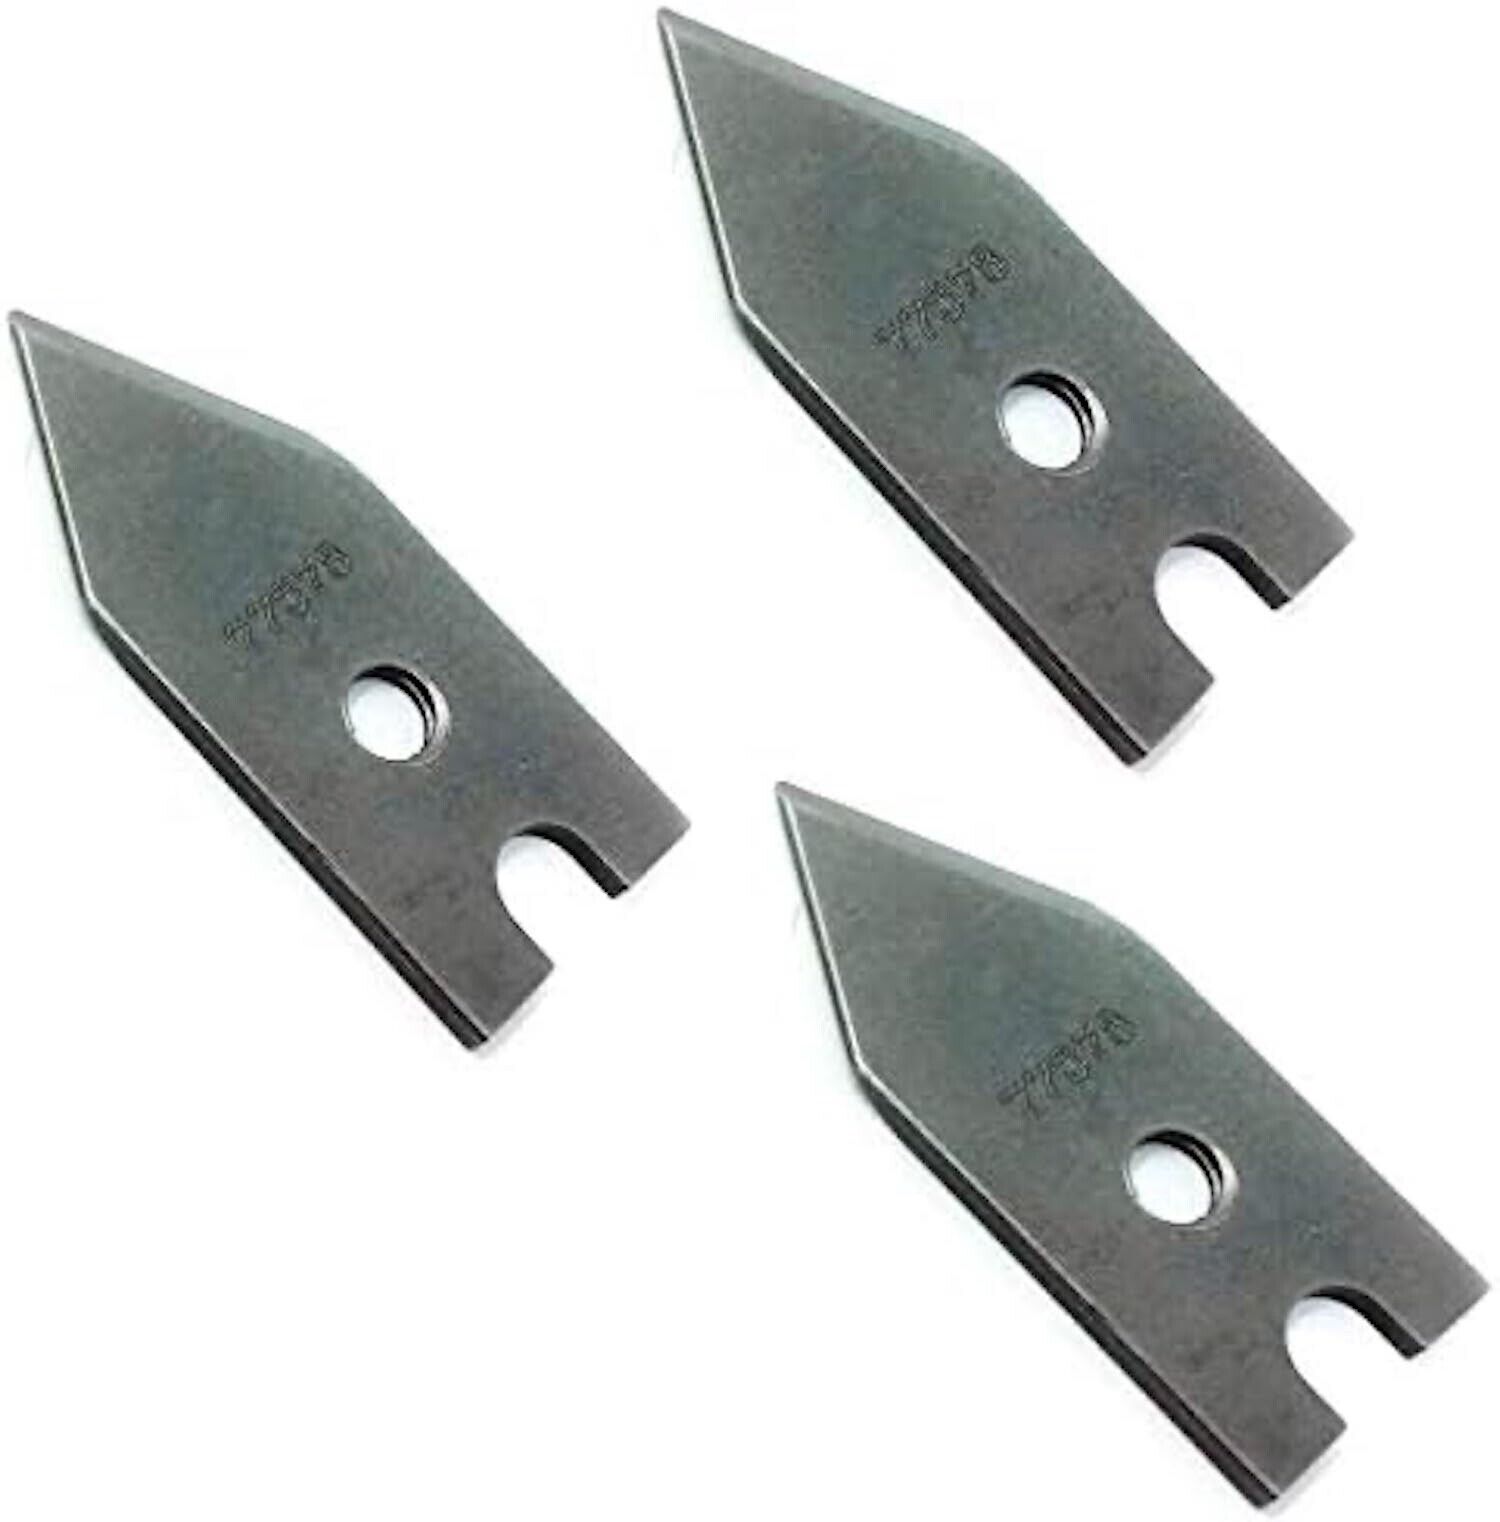 3 Pk Replacement Knife Edlund S-11 Commercial Can Opener Cozzini Cutlery Imports